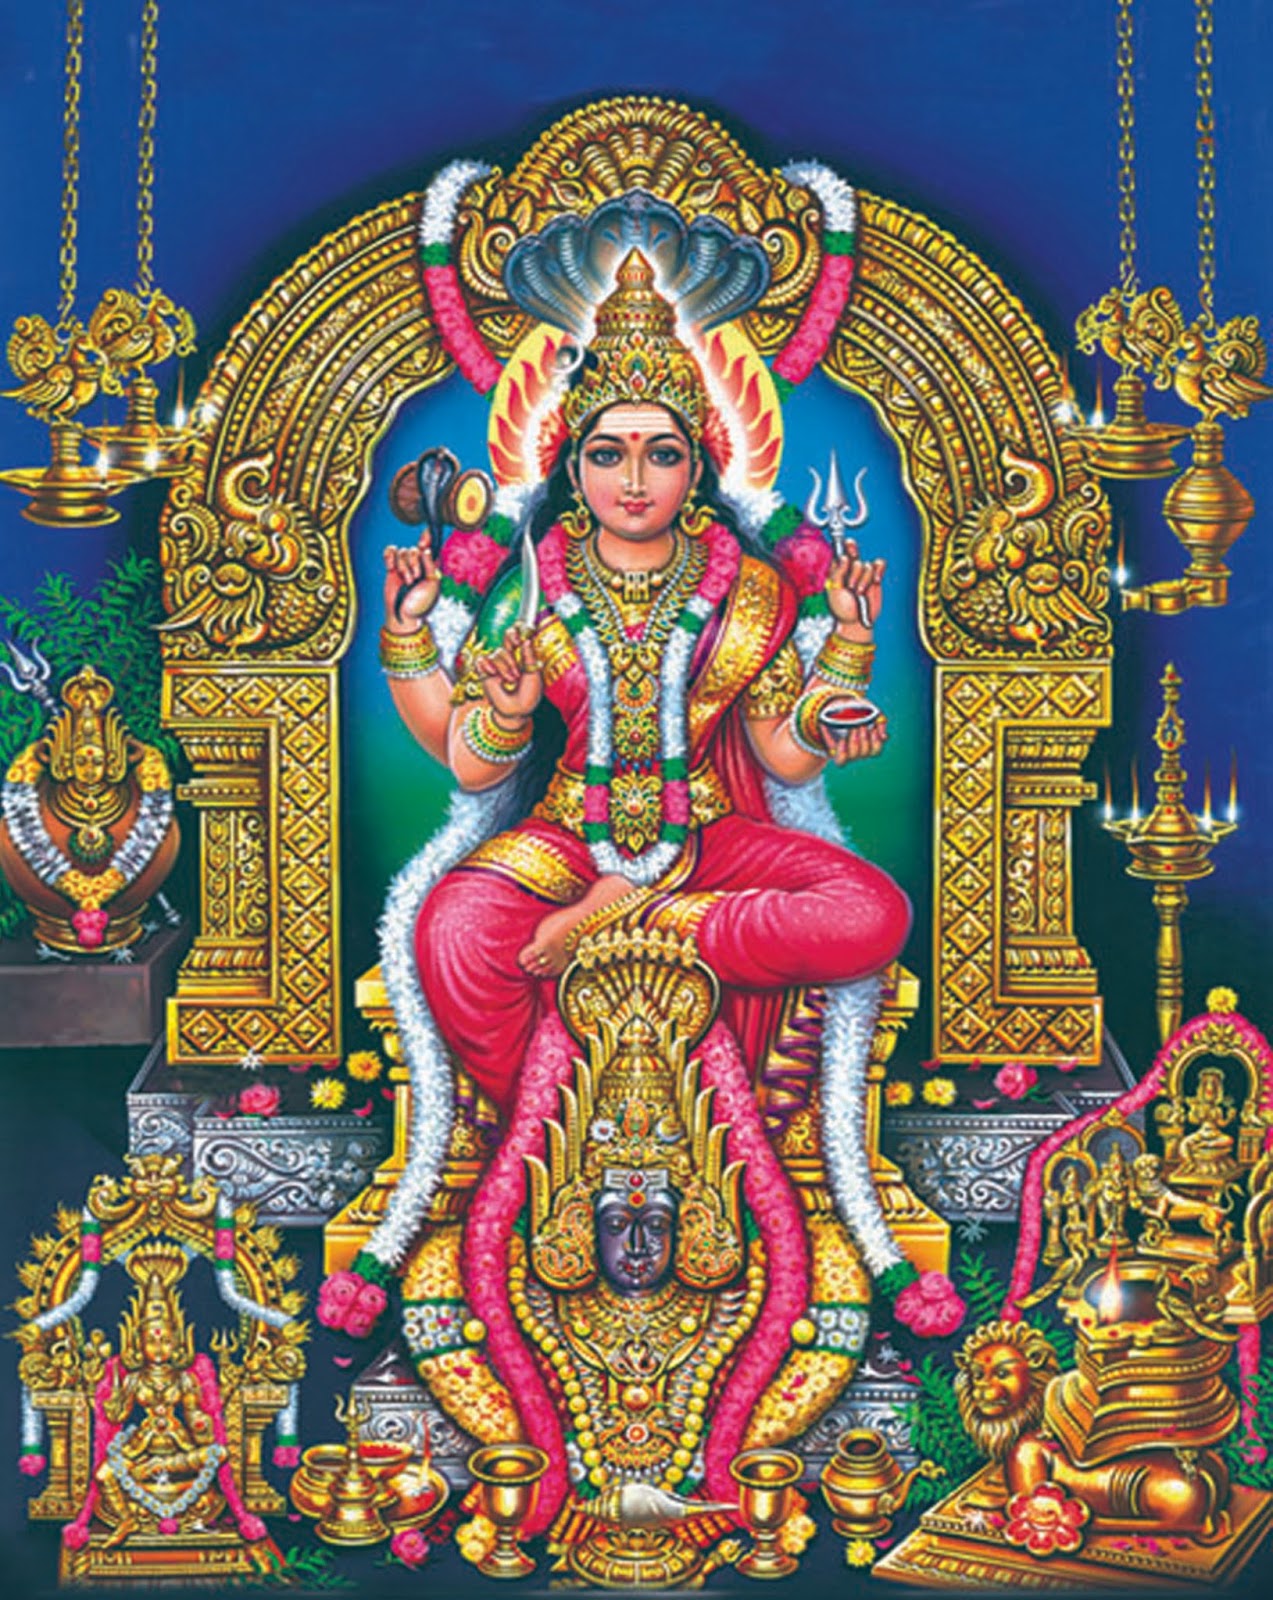 Gods-Leaders-Images-Drawings: Hindu Gods Collection